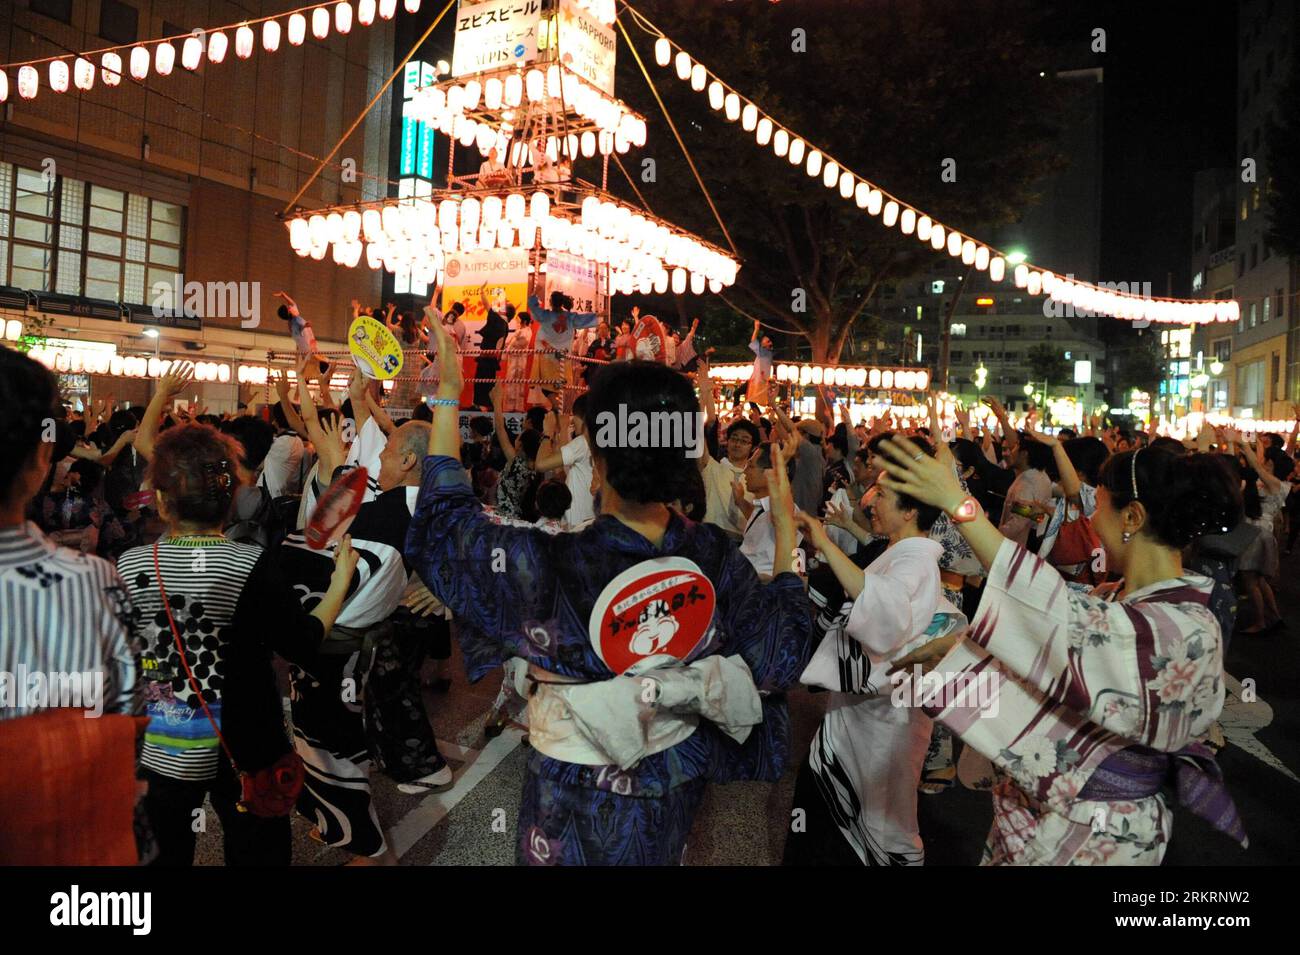 Bildnummer: 58287163  Datum: 28.07.2012  Copyright: imago/Xinhua (120728) -- TOKYO, July 28, 2012 (Xinhua) -- perform the traditional Bon Odori to celebrate the coming Obon festival in Tokyo, Japan, on July 28, 2012. The festival of Obon is a centuries old Japanese Buddhist custom, which celebrates and honors the lives of deceased family members and friends.(Xinhua/Ma Ping) (bxq) JAPAN-TOKYO-OBON FESTIVAL PUBLICATIONxNOTxINxCHN Gesellschaft Religion Buddhismus Obon Fest Tradition xda x0x 2012 quer      58287163 Date 28 07 2012 Copyright Imago XINHUA  Tokyo July 28 2012 XINHUA perform The Tradi Stock Photo